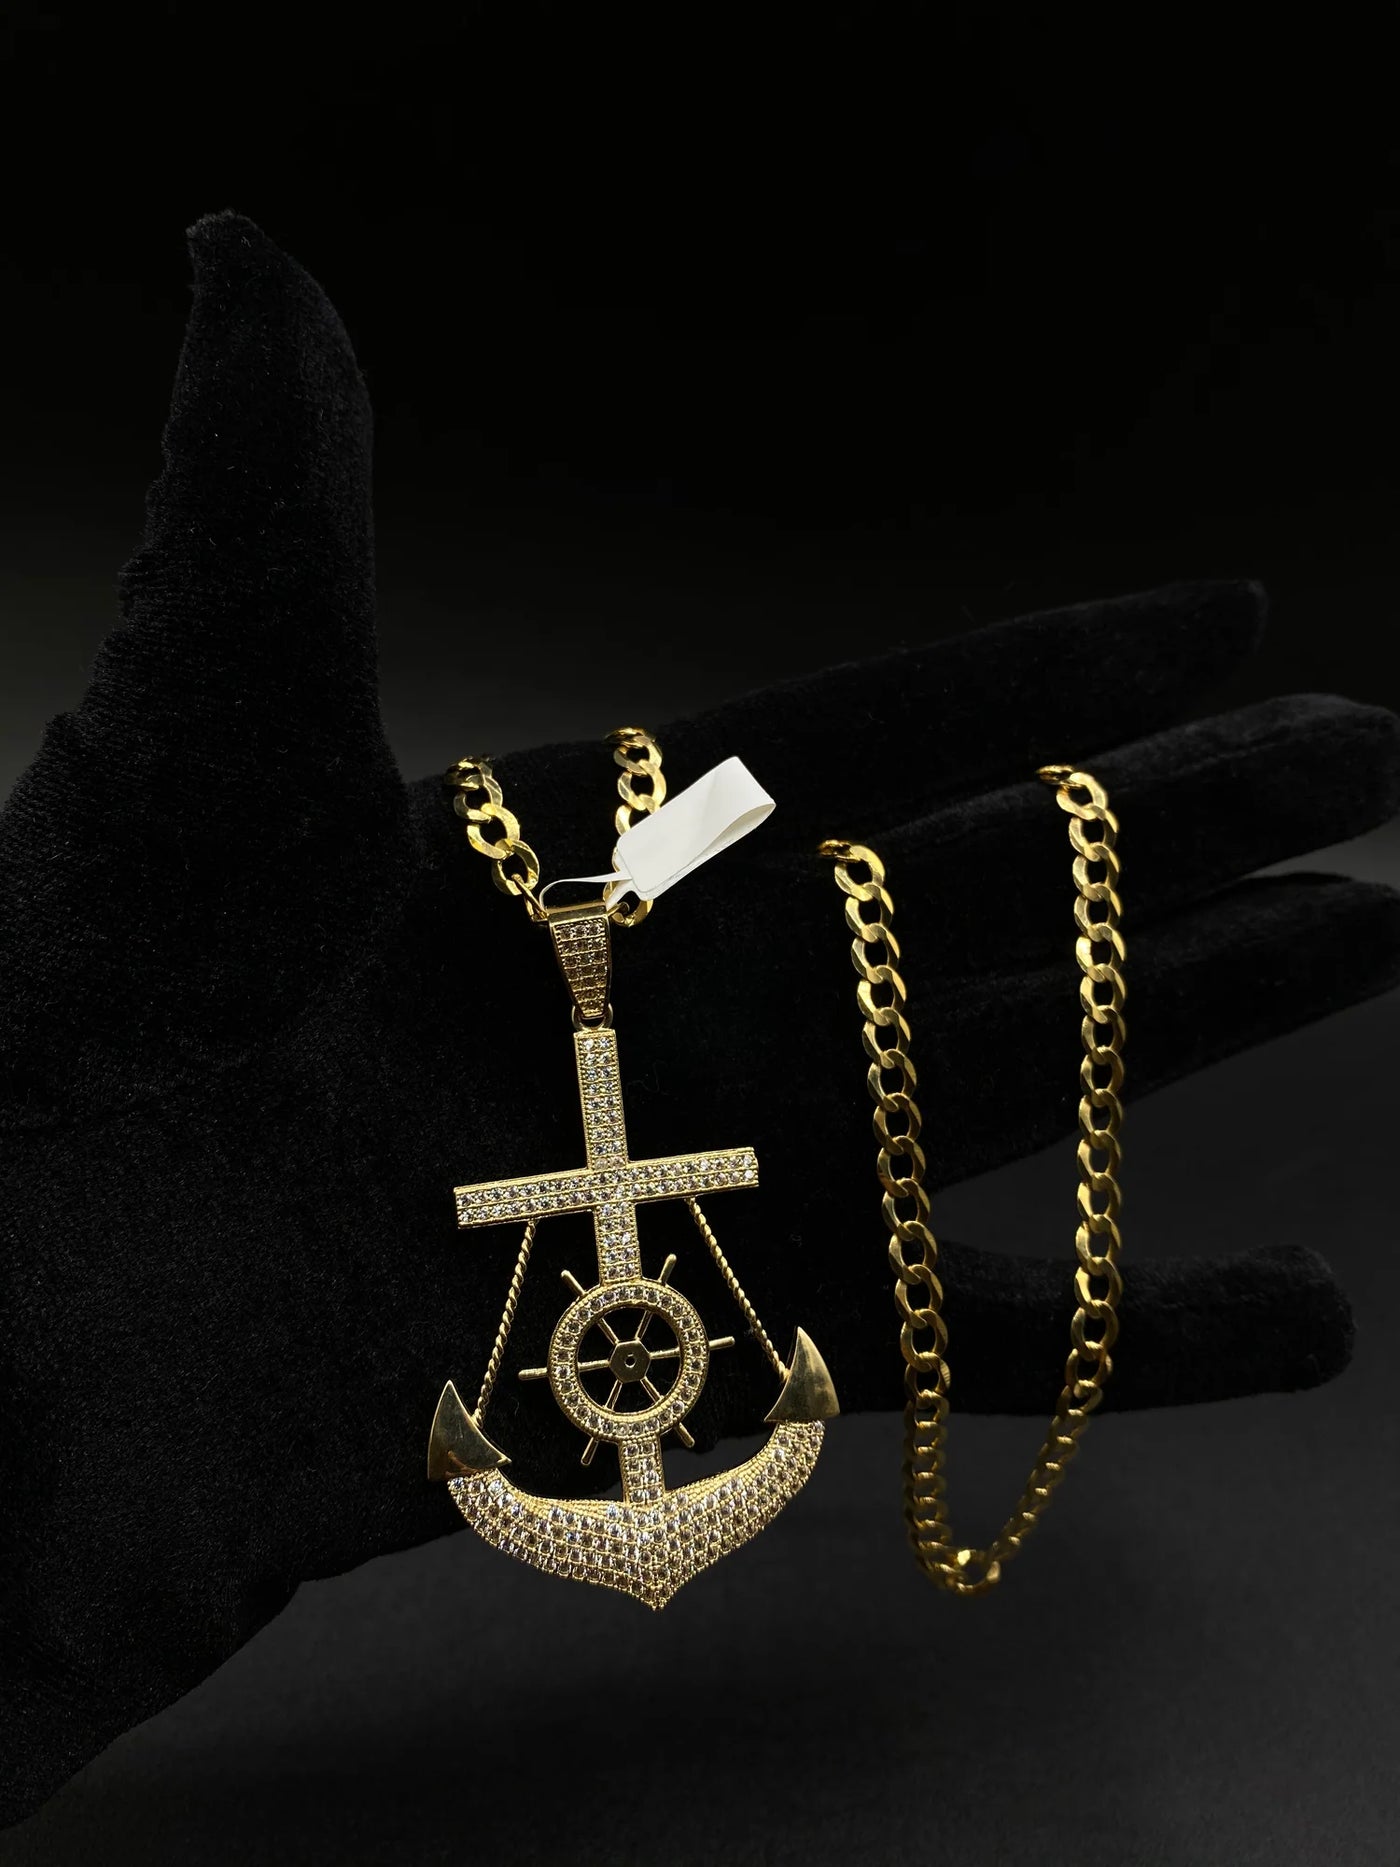 14k Gold Big Anchor Pendant or Chain set